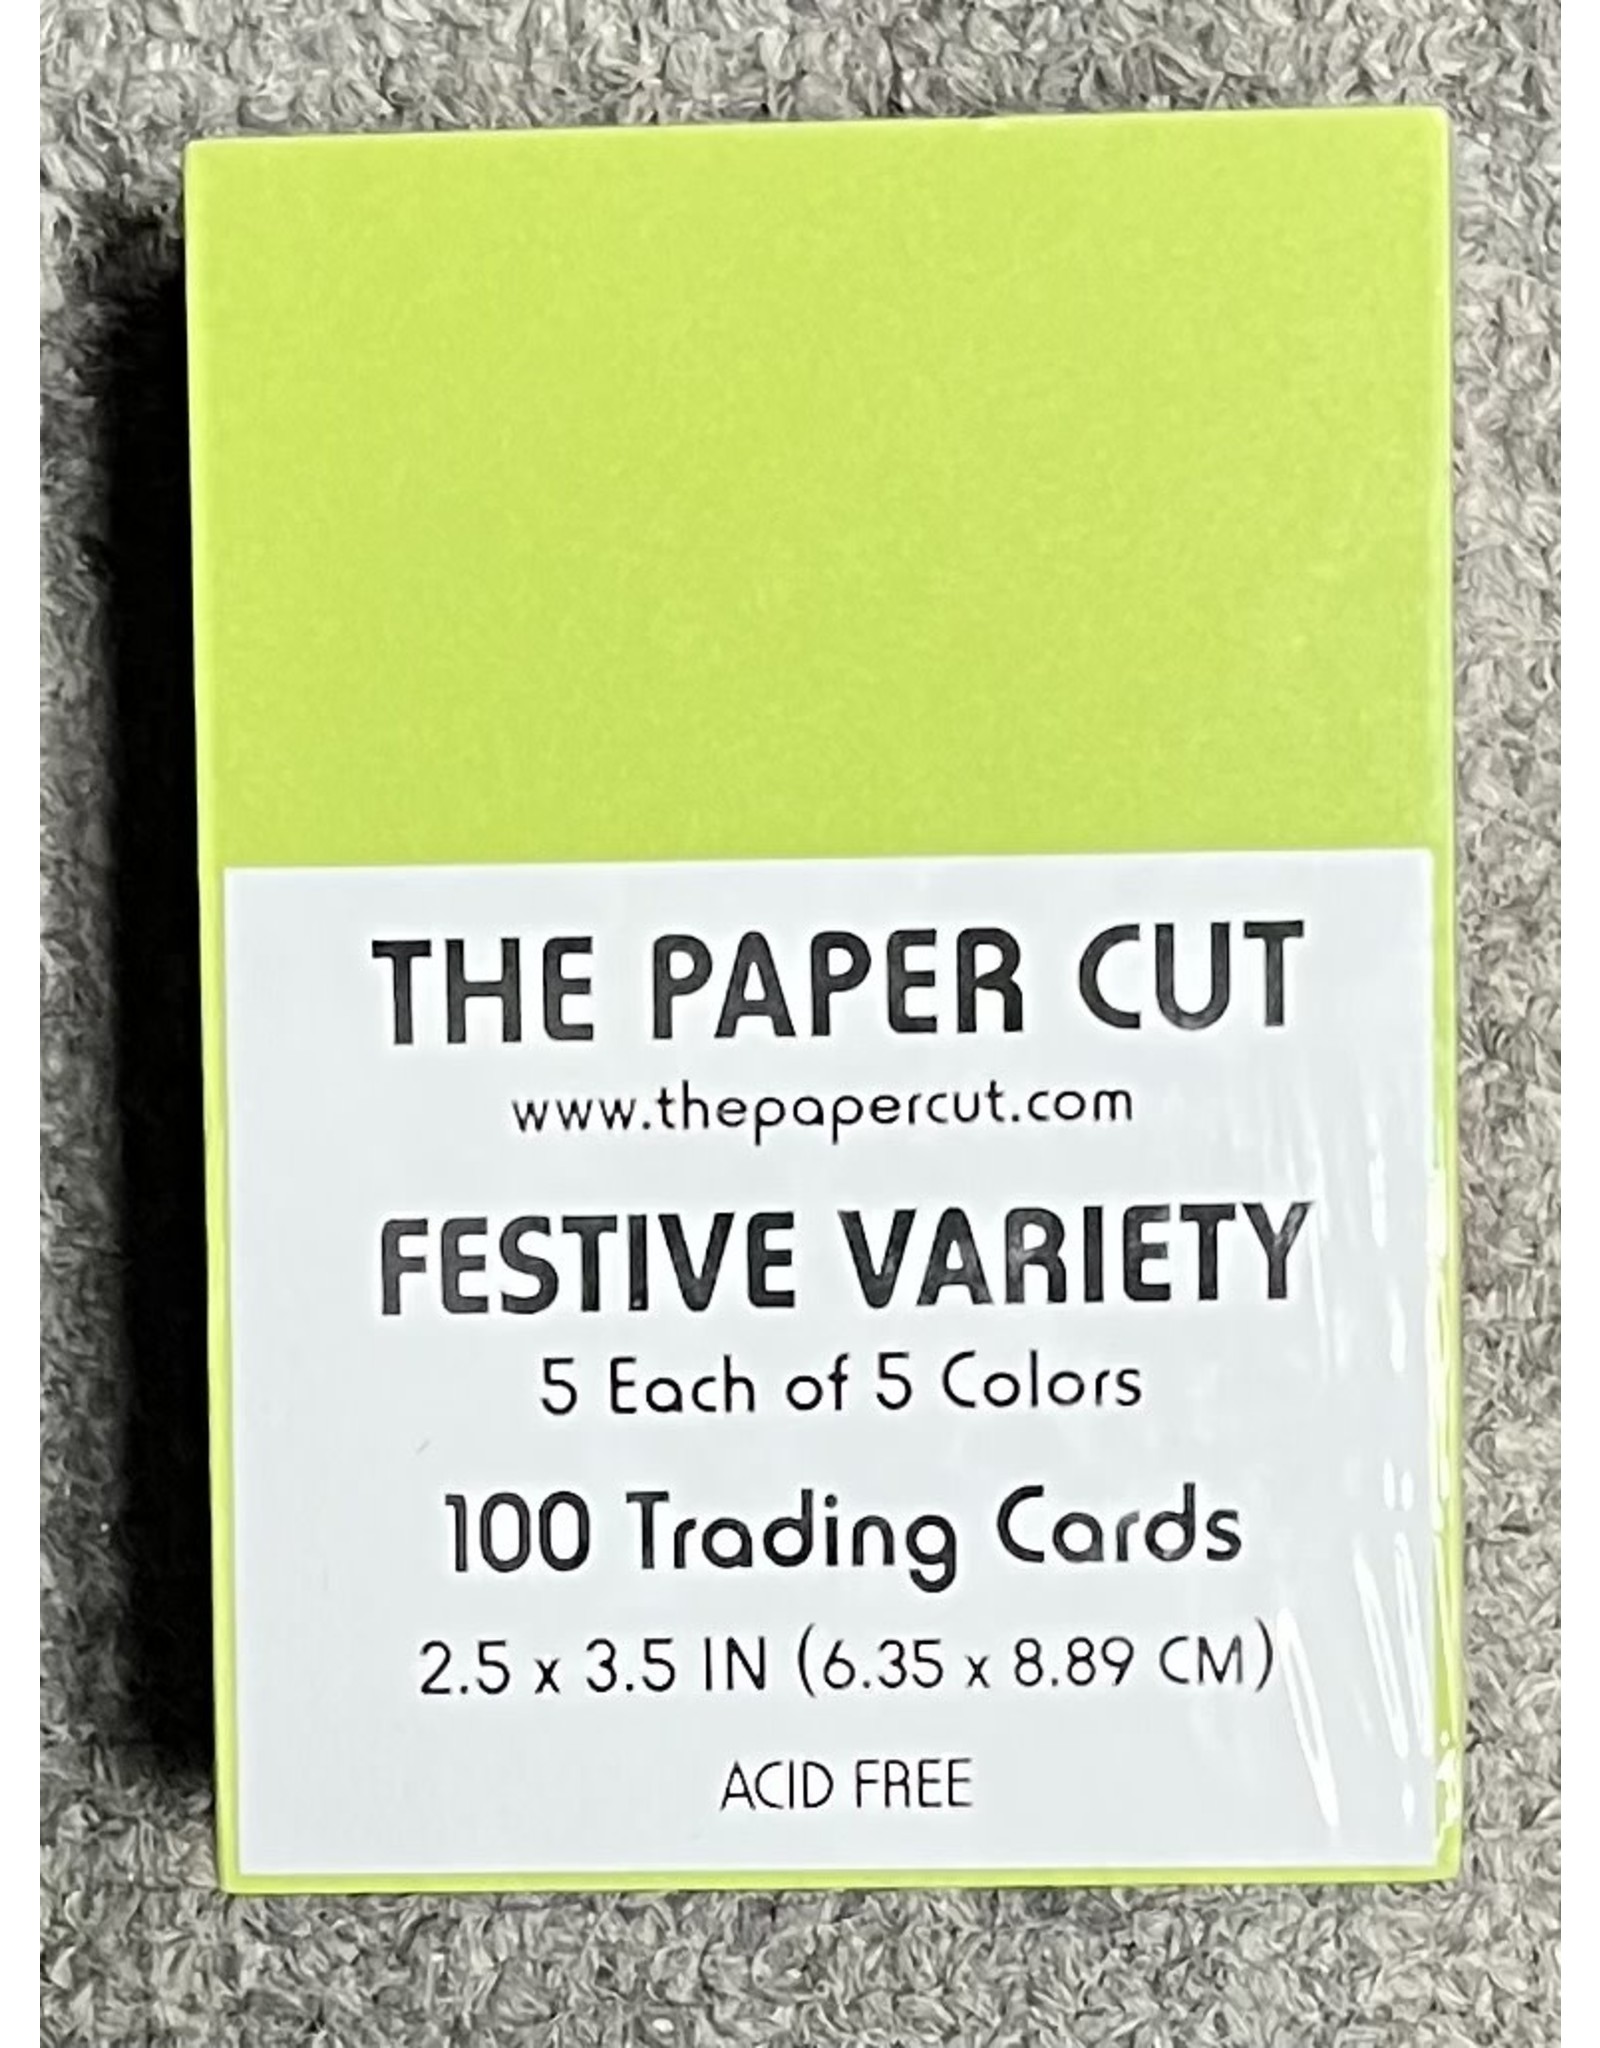 PAPER CUT THE PAPER CUT FESTIVE VARIETY TRADING CARDS 2.5x3.5 100/PK